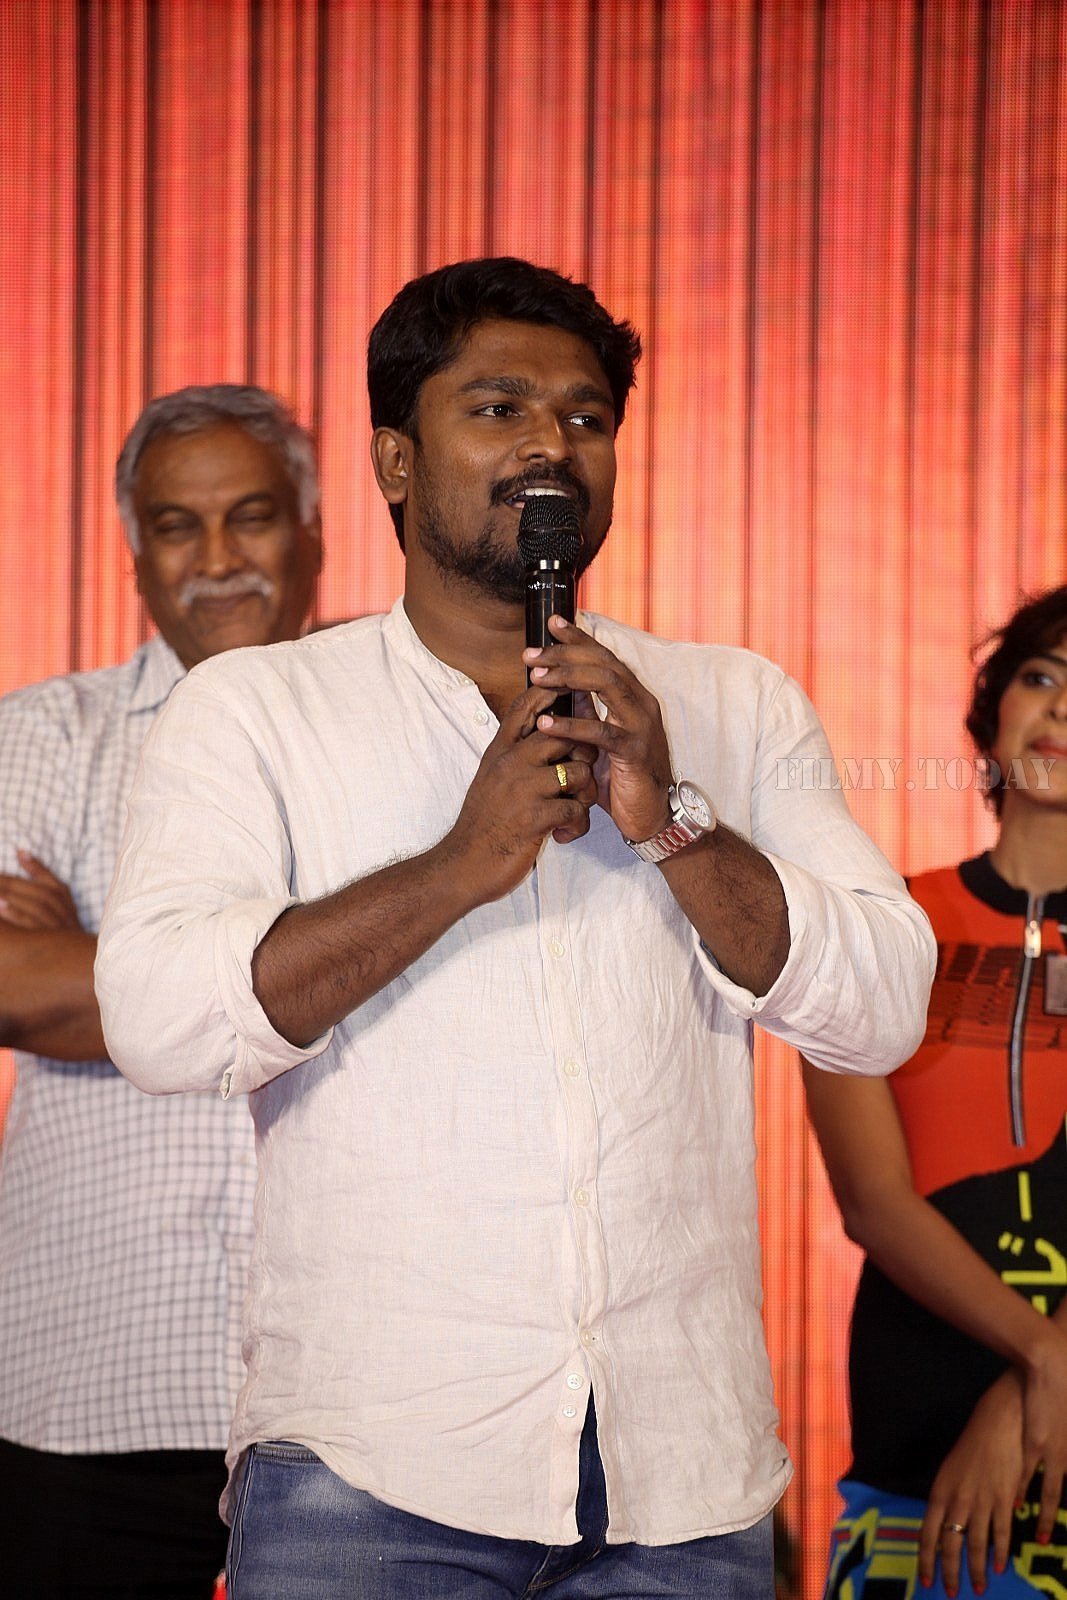 Aame Movie Press Meet Photos | Picture 1662622